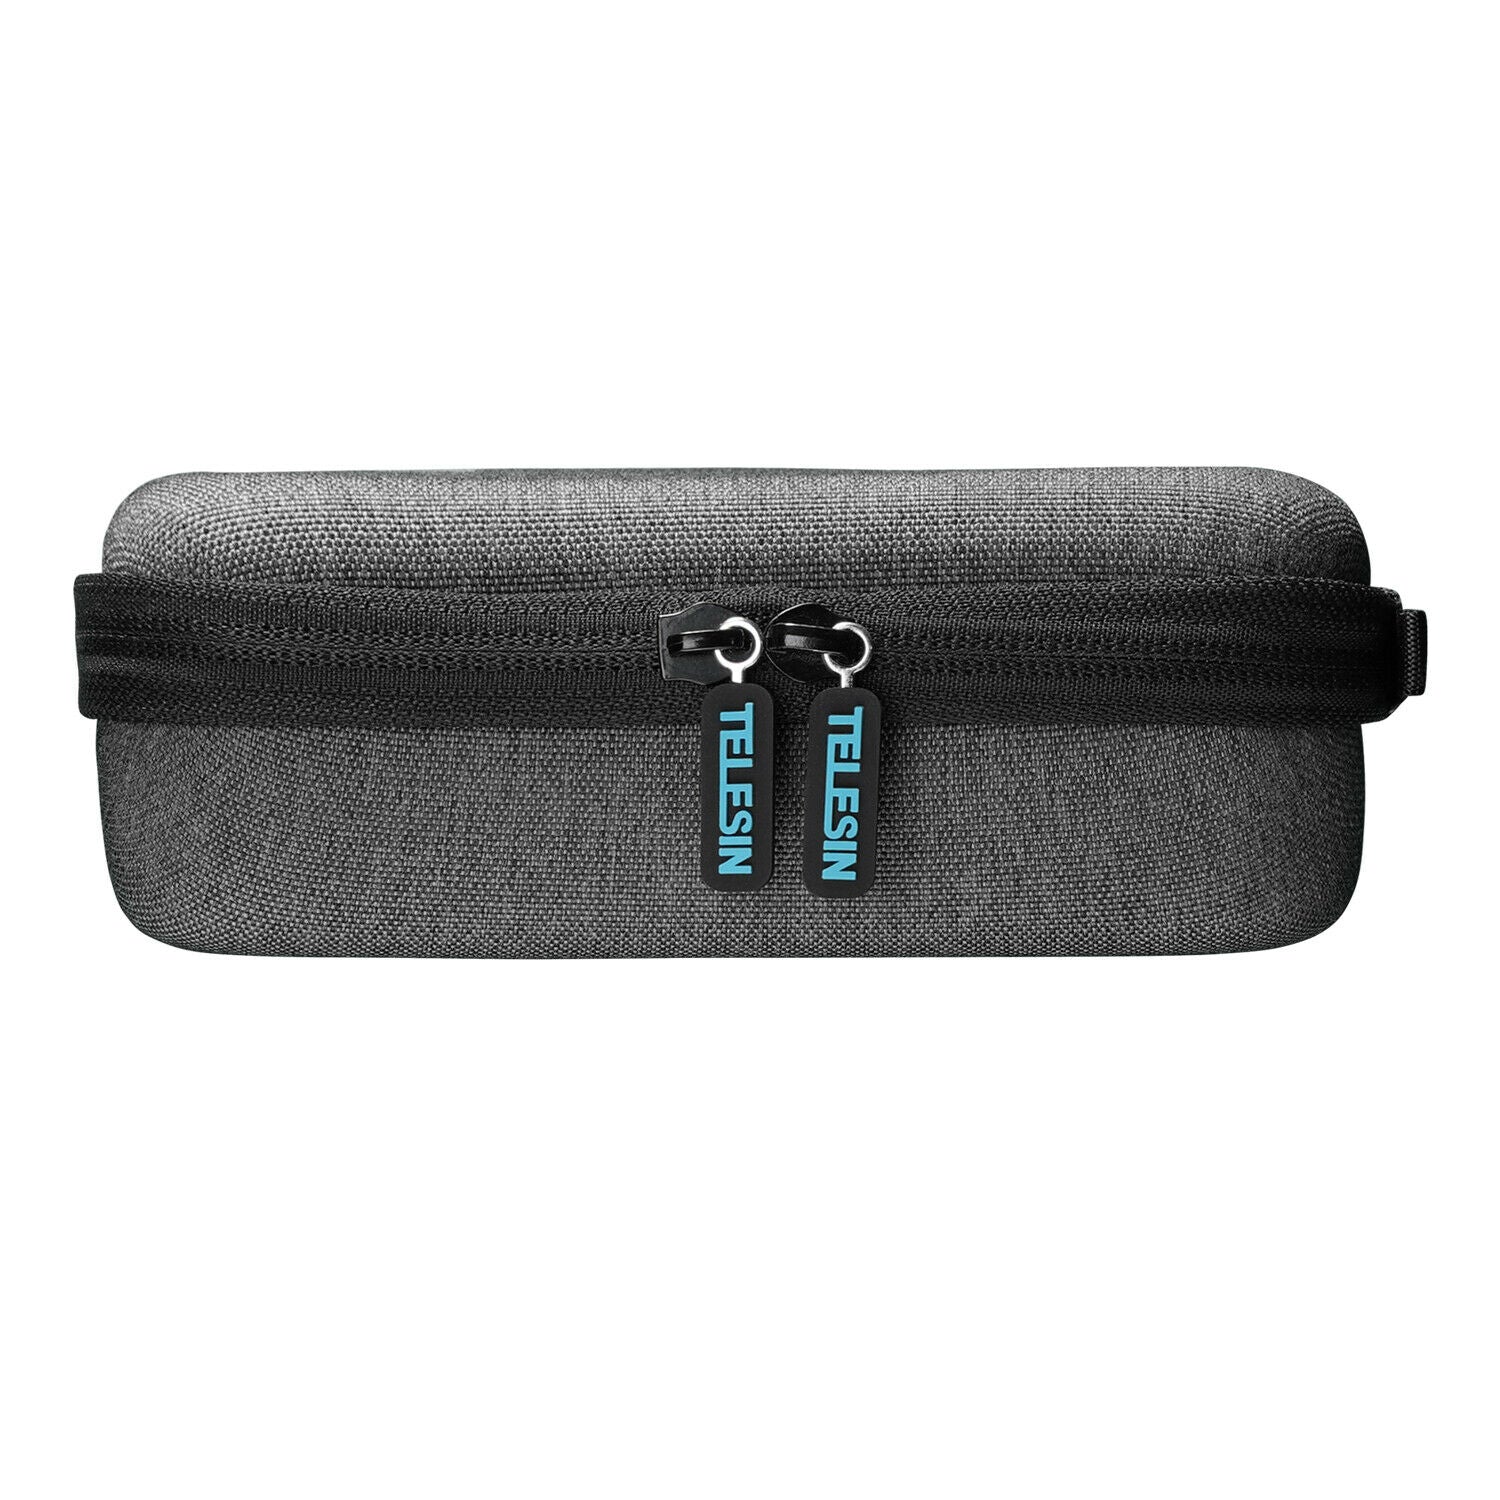 Portable Storage Bag Carrying case cover for GoPro Hero 10/9/8/7 Action Camera